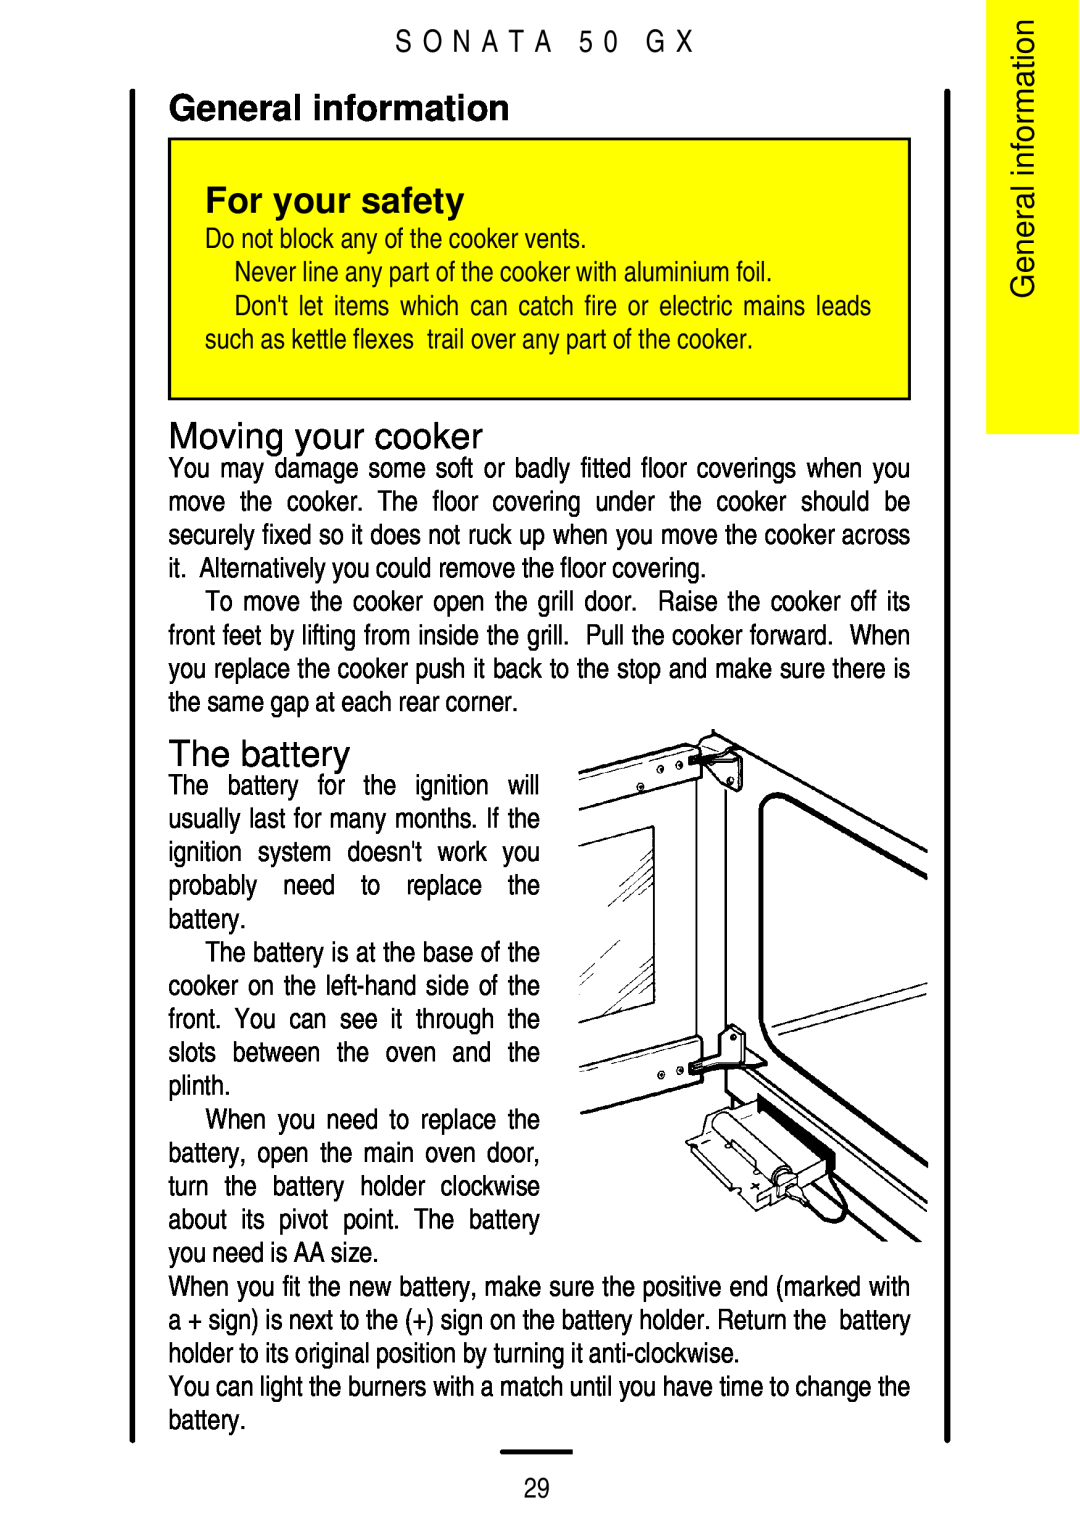 Parkinson Cowan SONATA 50GX installation instructions General information For your safety, Moving your cooker, The battery 